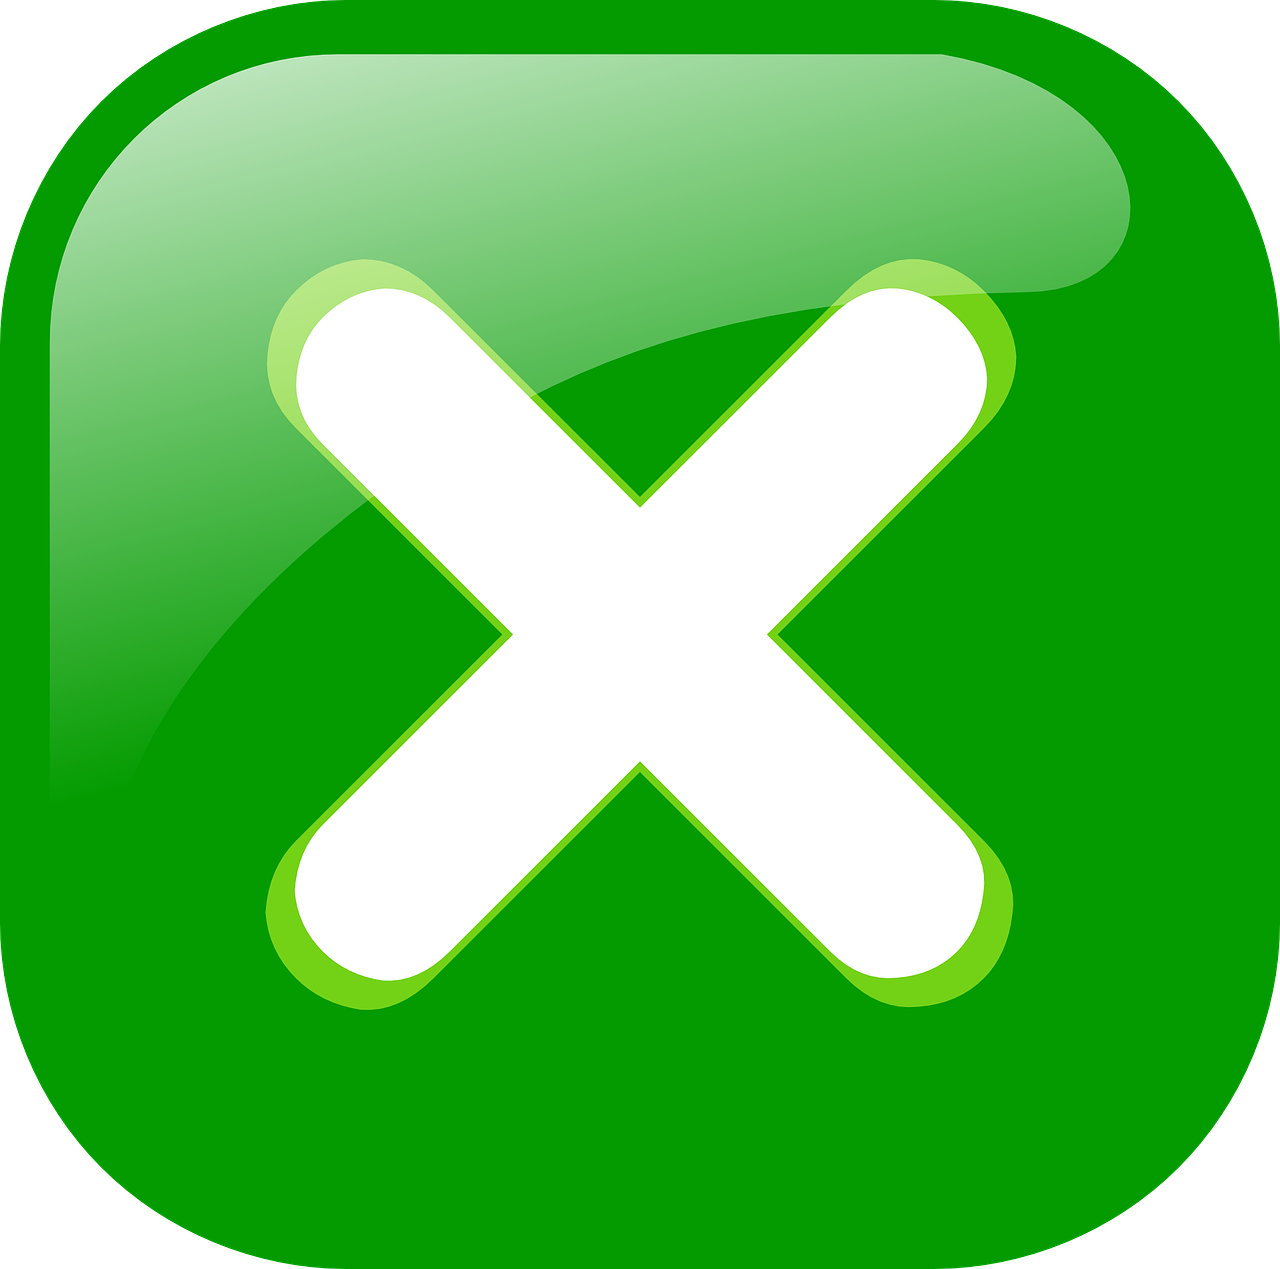 Cross Button Green White Stop PNG.